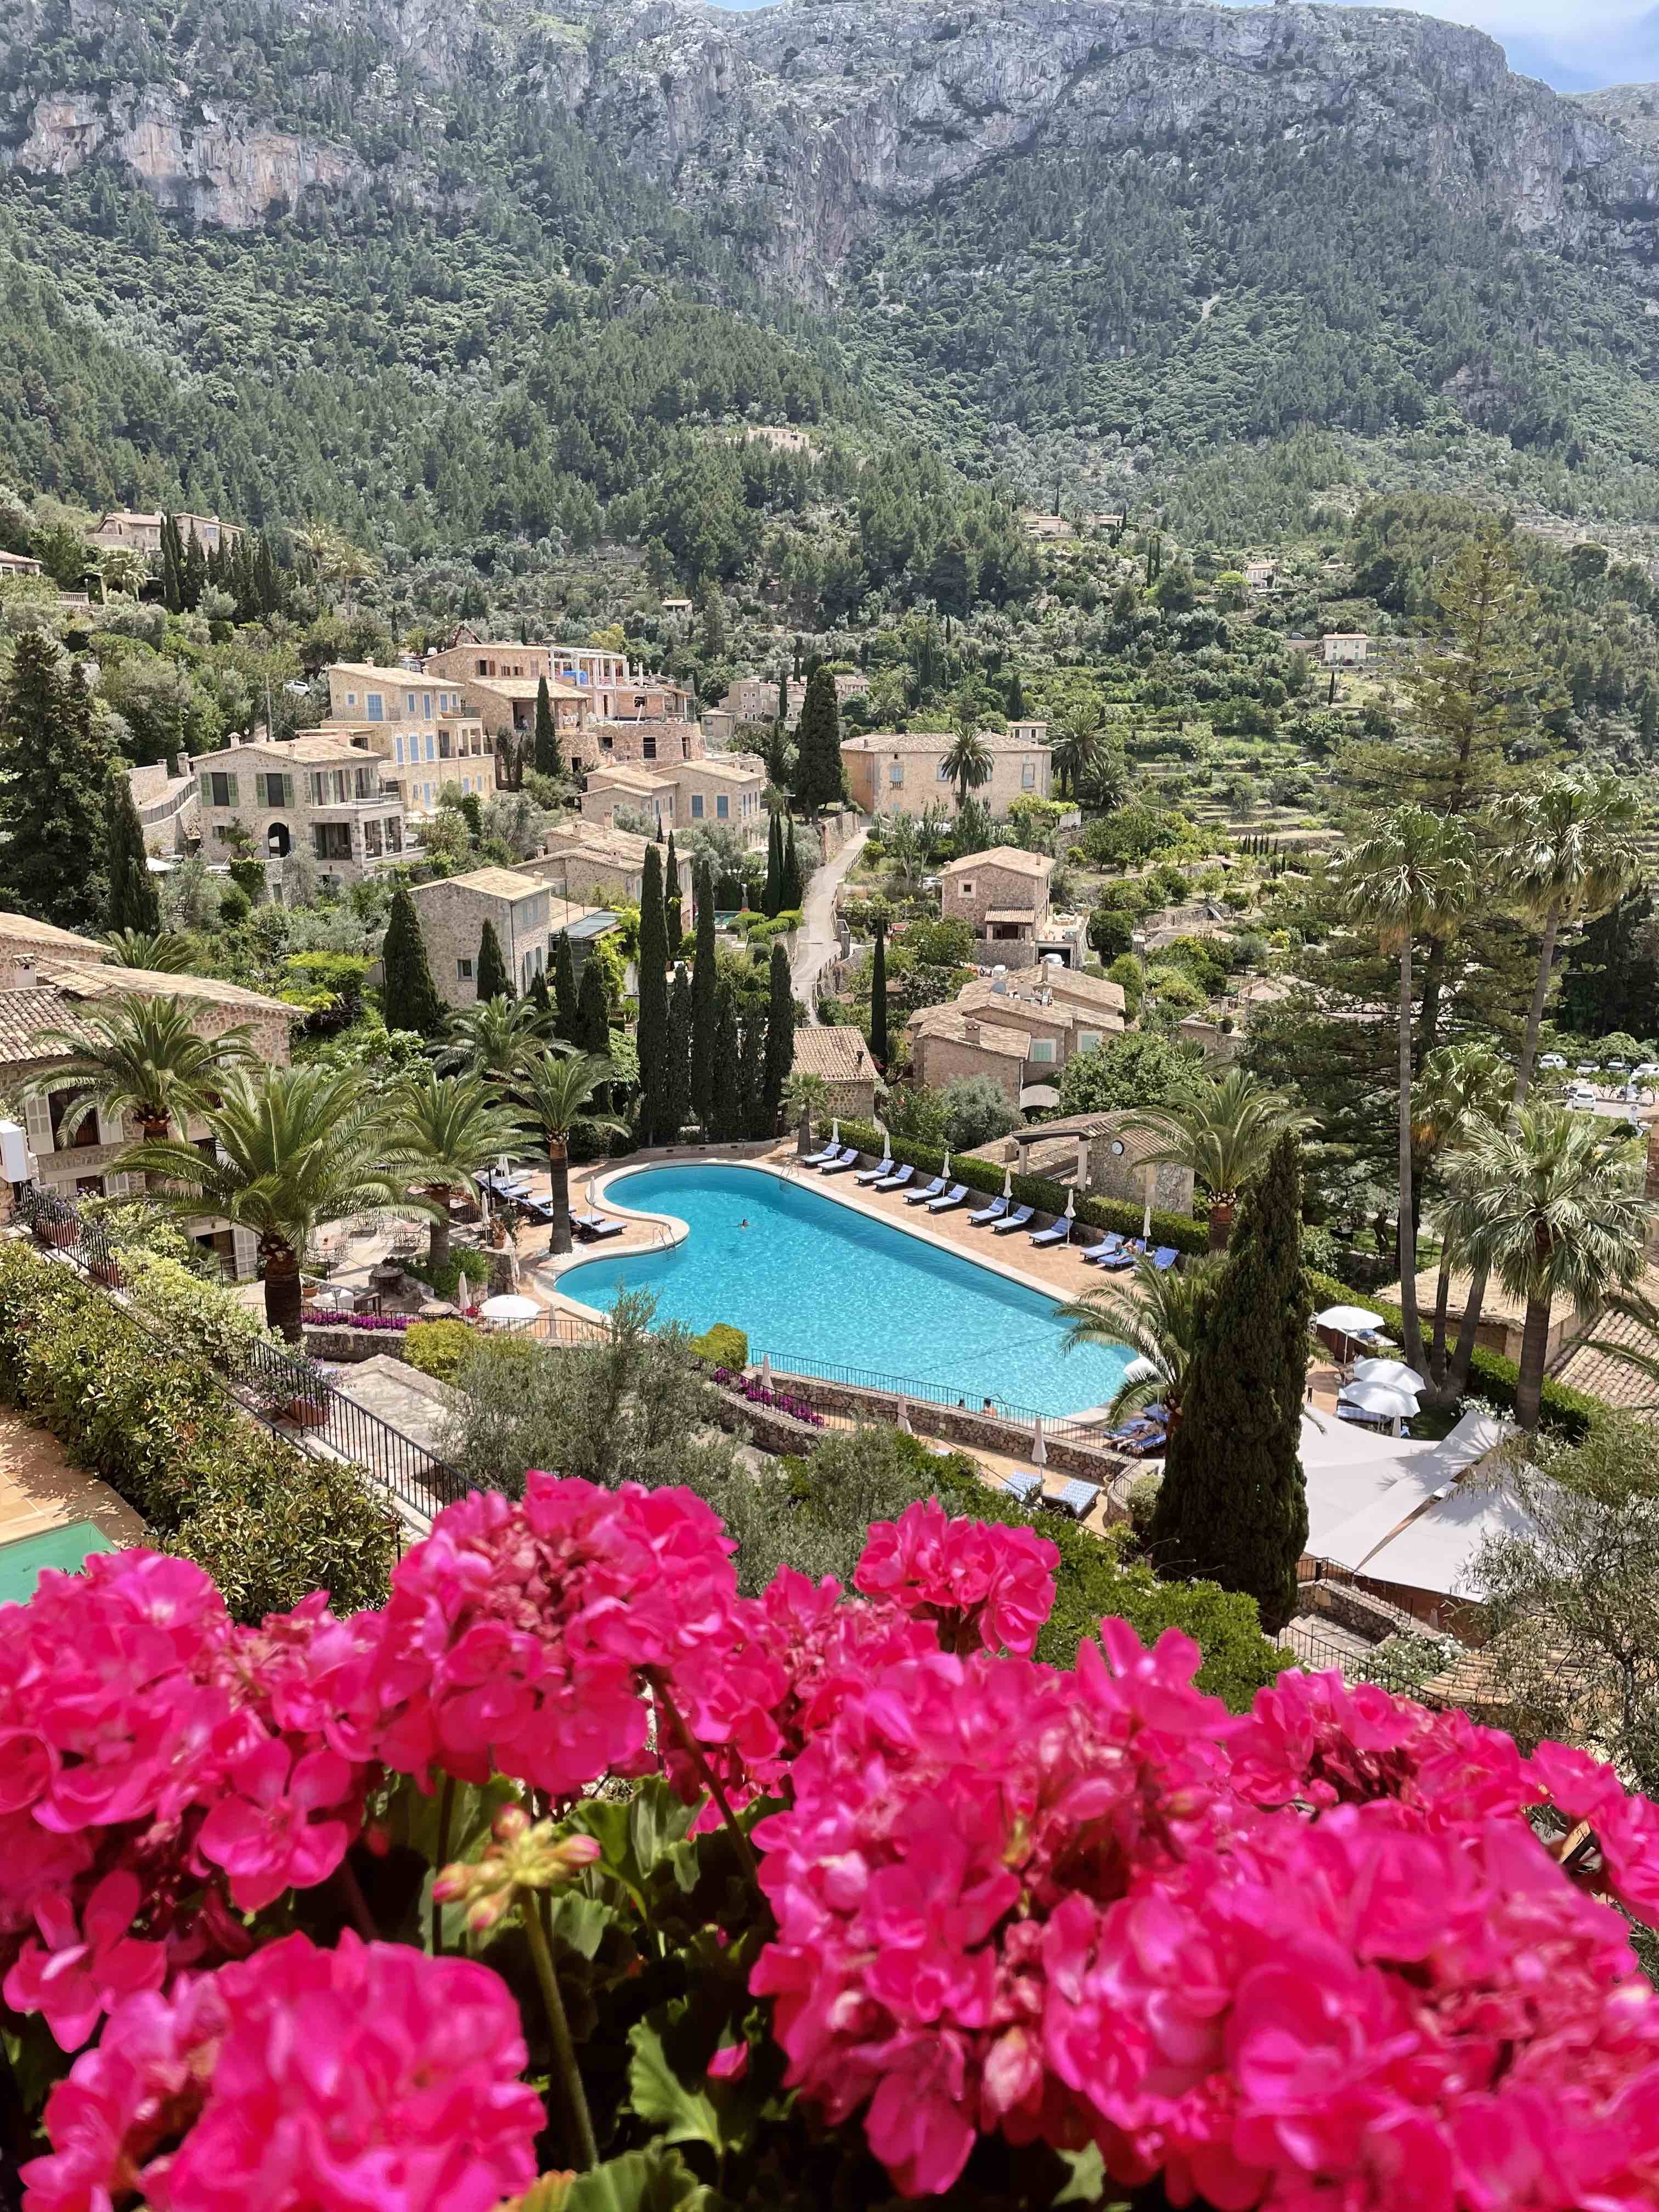 Belmond La Residencia truly is one of the most amazing family-friendly hotels in Mallorca